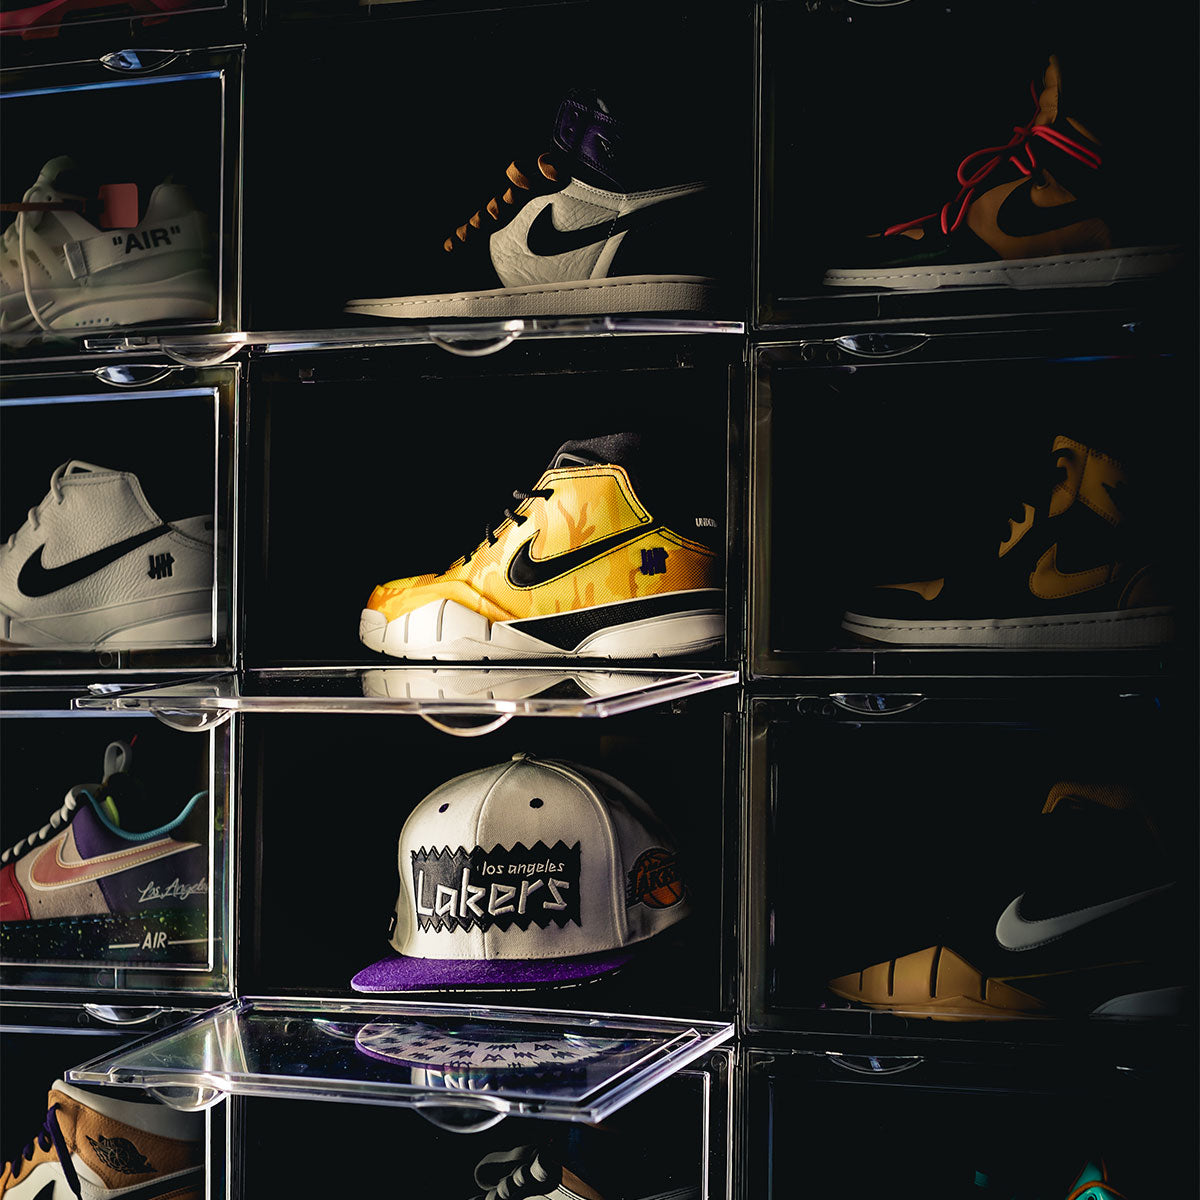 Wall of Sneaker Throne Drop Sides showing easy open magnetic doors